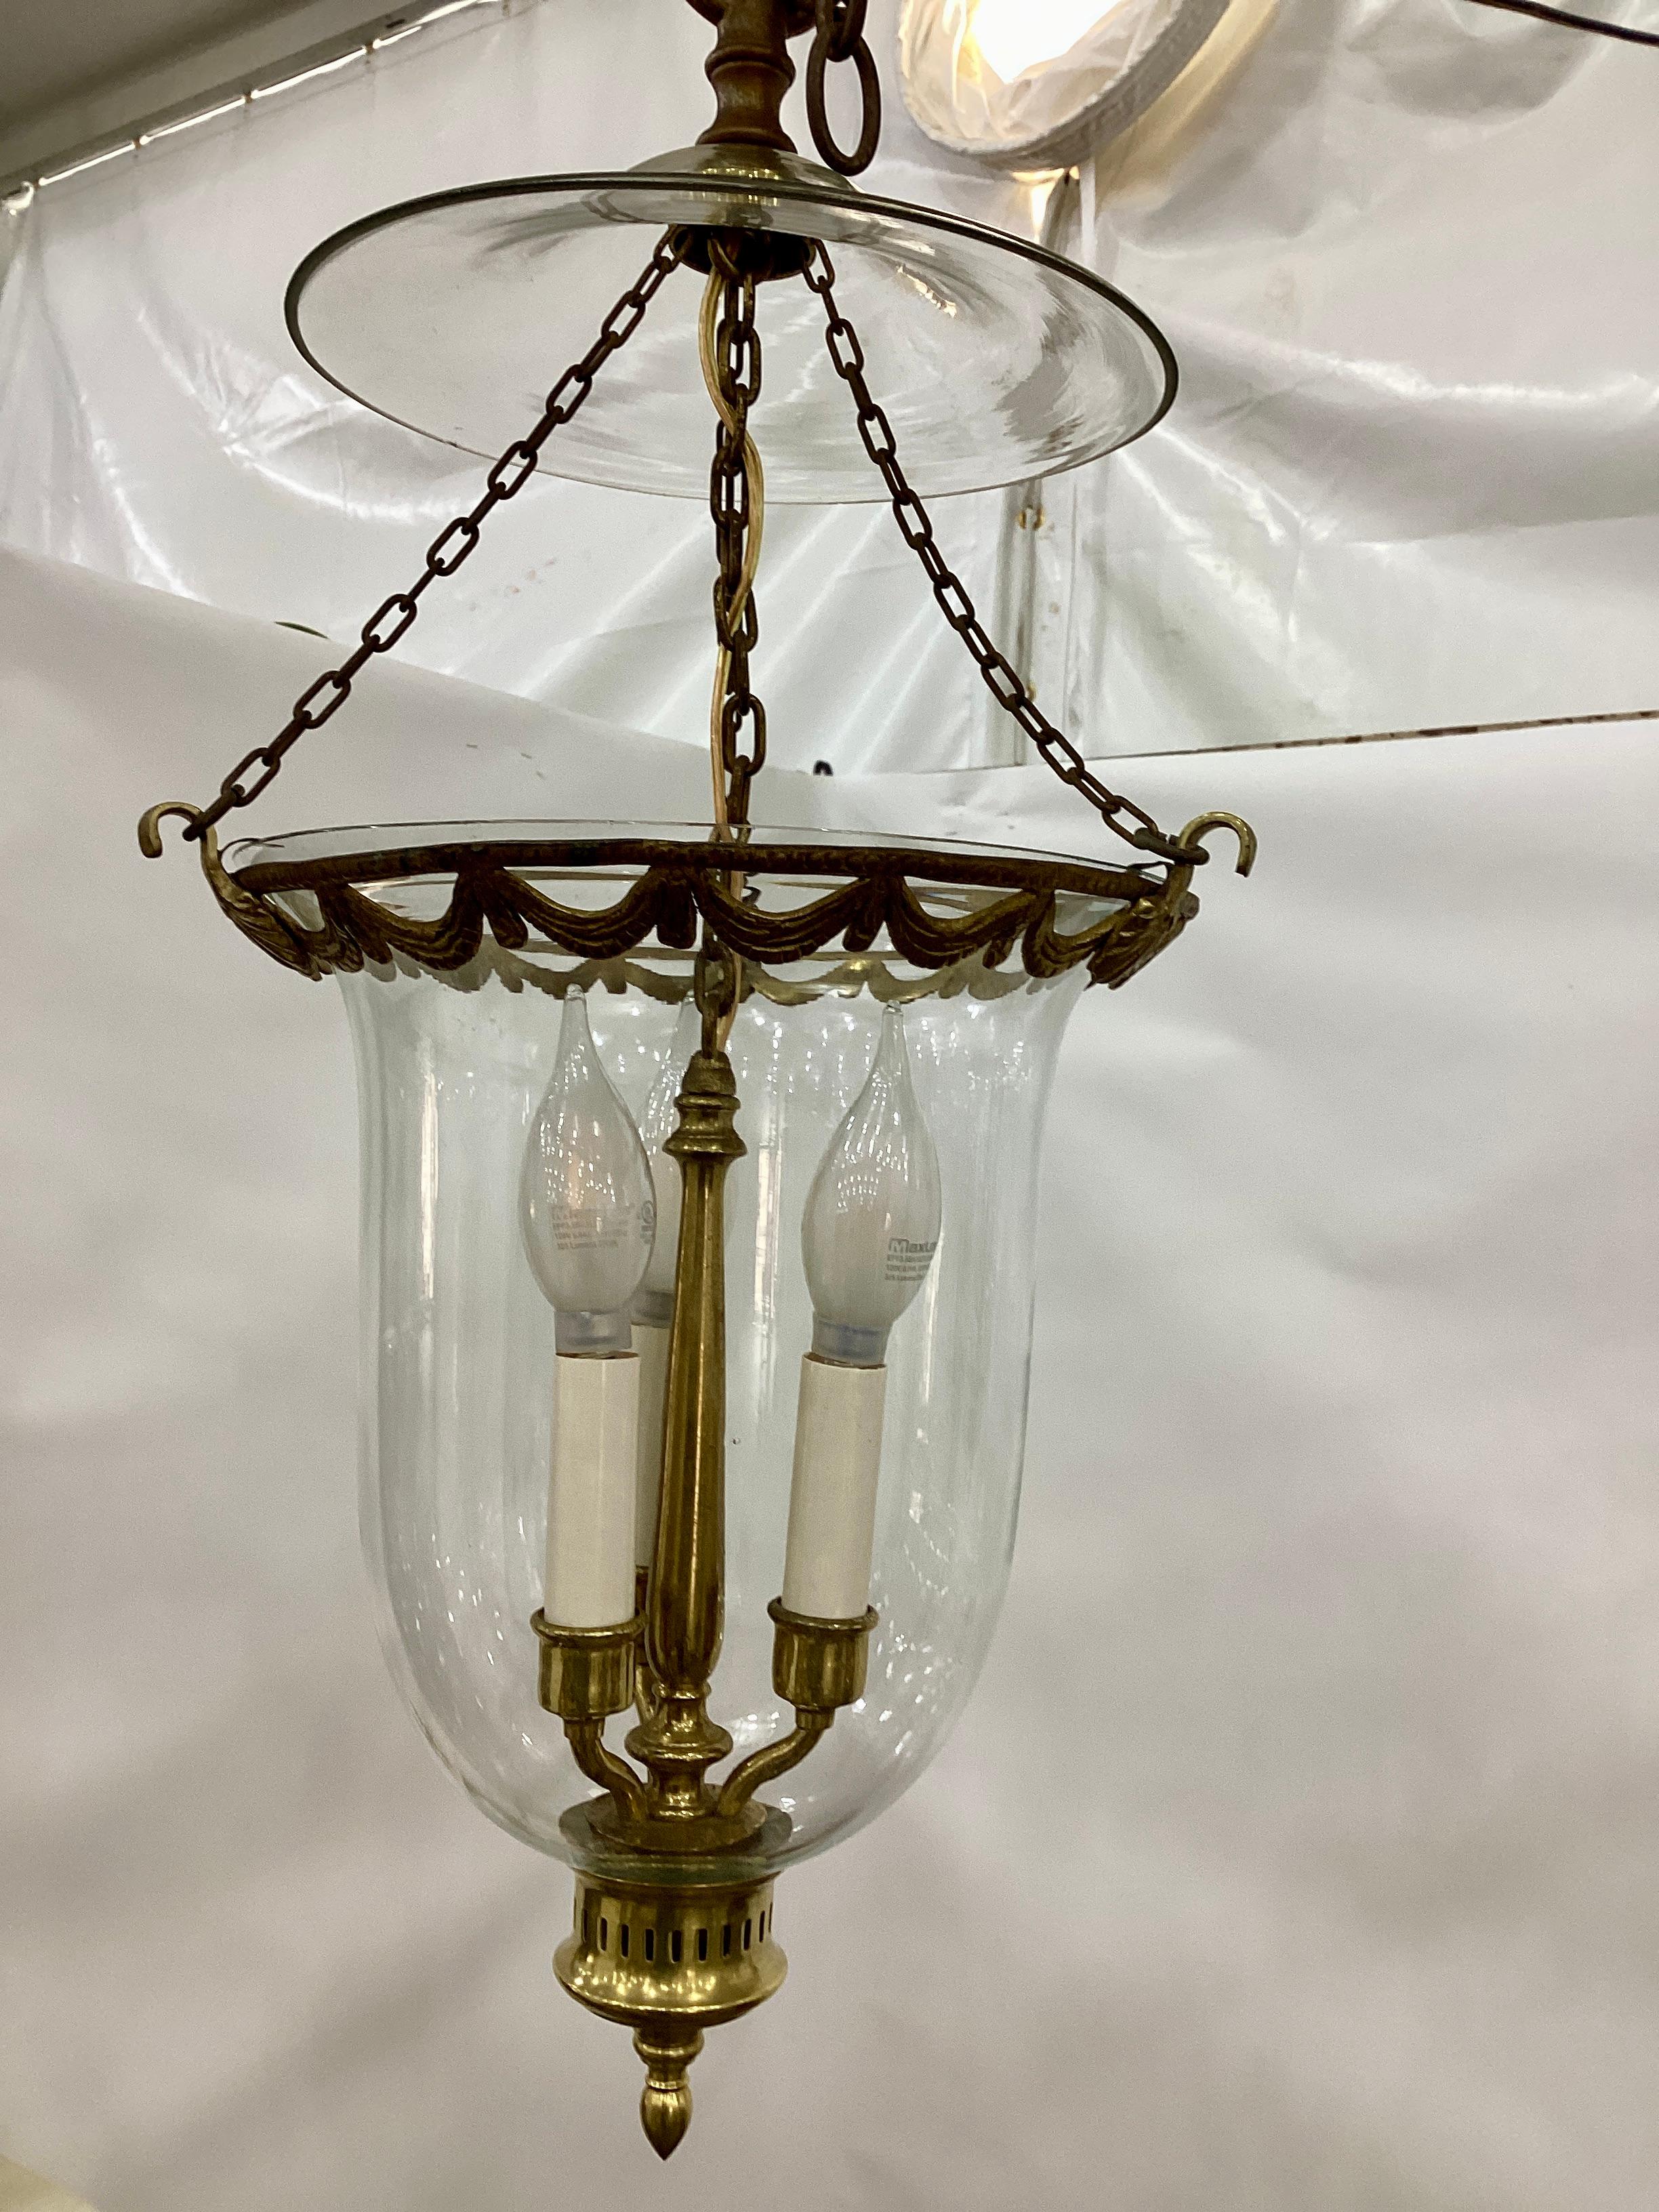 Vintage Bell Jar Lantern with Draped Swag Ring. Top smoke bell is suspended with three chain lengths connected to a ring with draped swag decoration. The bottom of the jar is finished with a brass cap and finial. 
Lantern is wired and in working